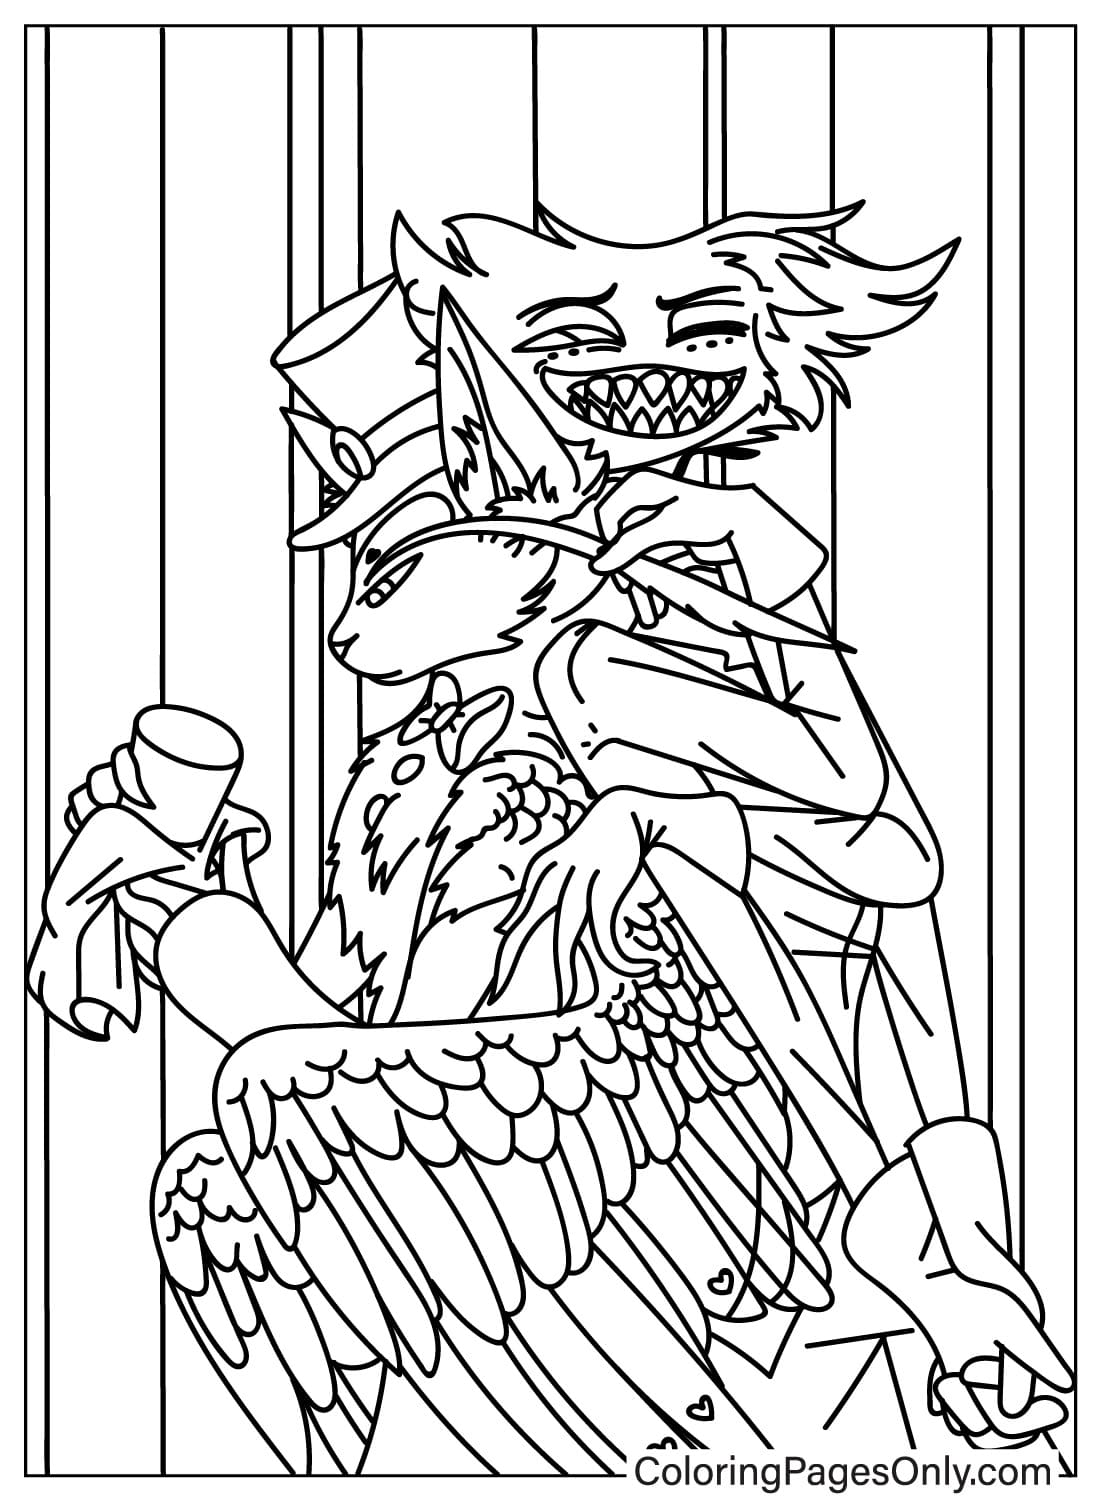 Husk and Angel Dust Coloring Page from Husk